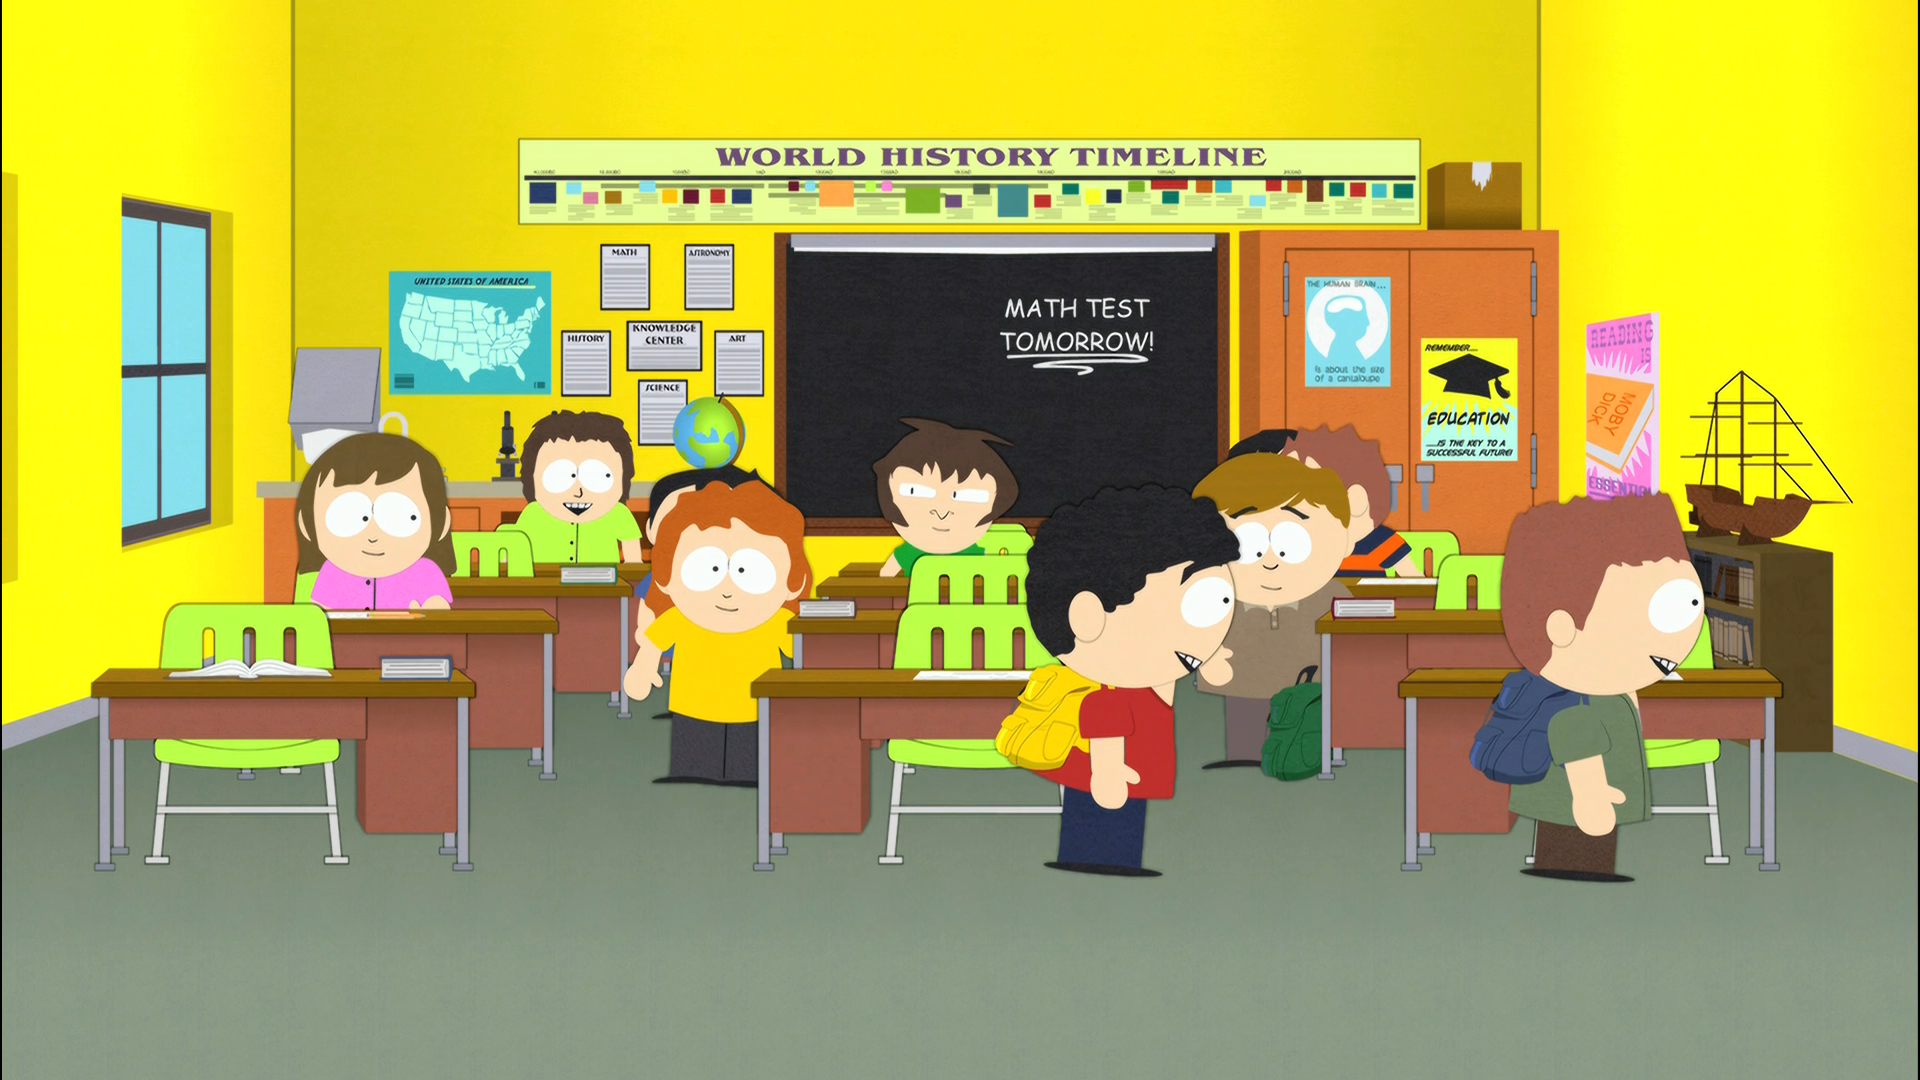 South Park Elementary School (@SouthParkREADS) / X